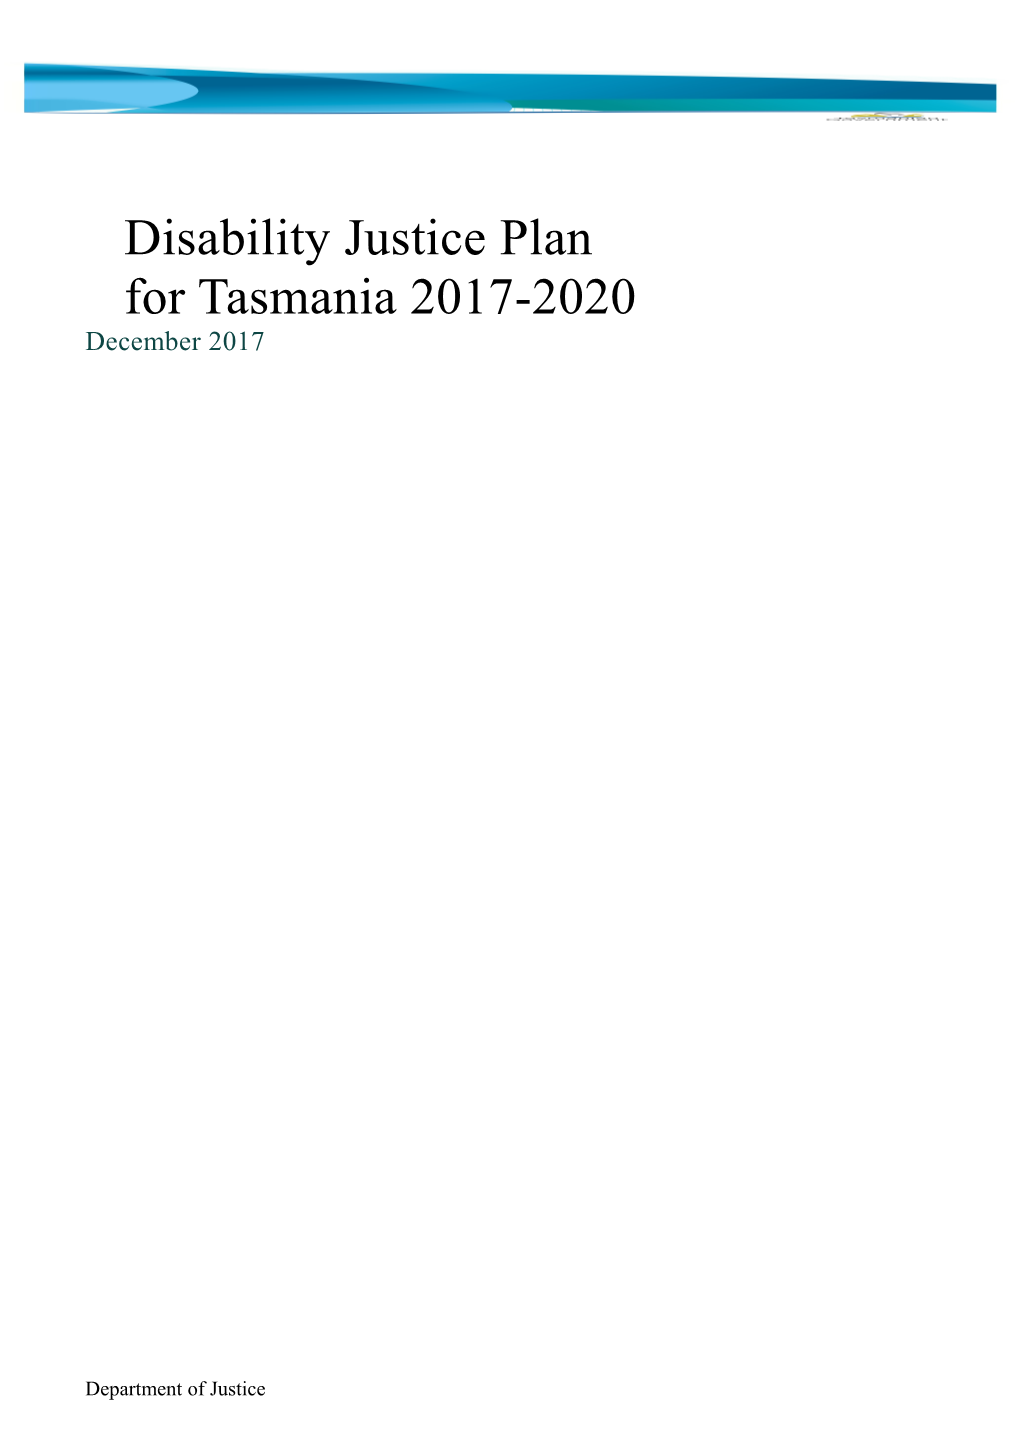 Disability Justice Plan for Tasmania 2017-2020